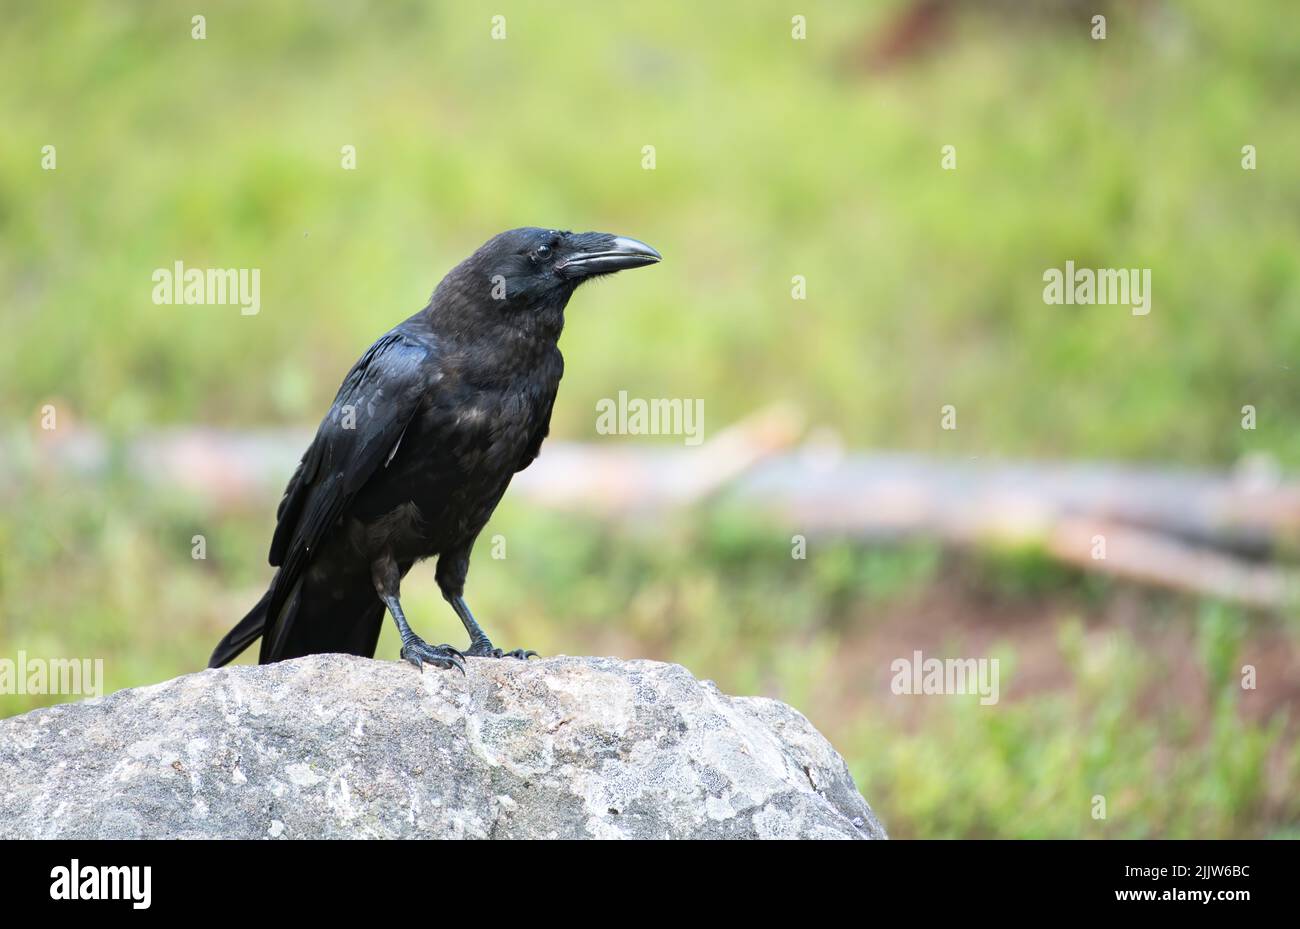 Common raven (Corvus corax) photographed in the Taiga forest of Finland. Stock Photo